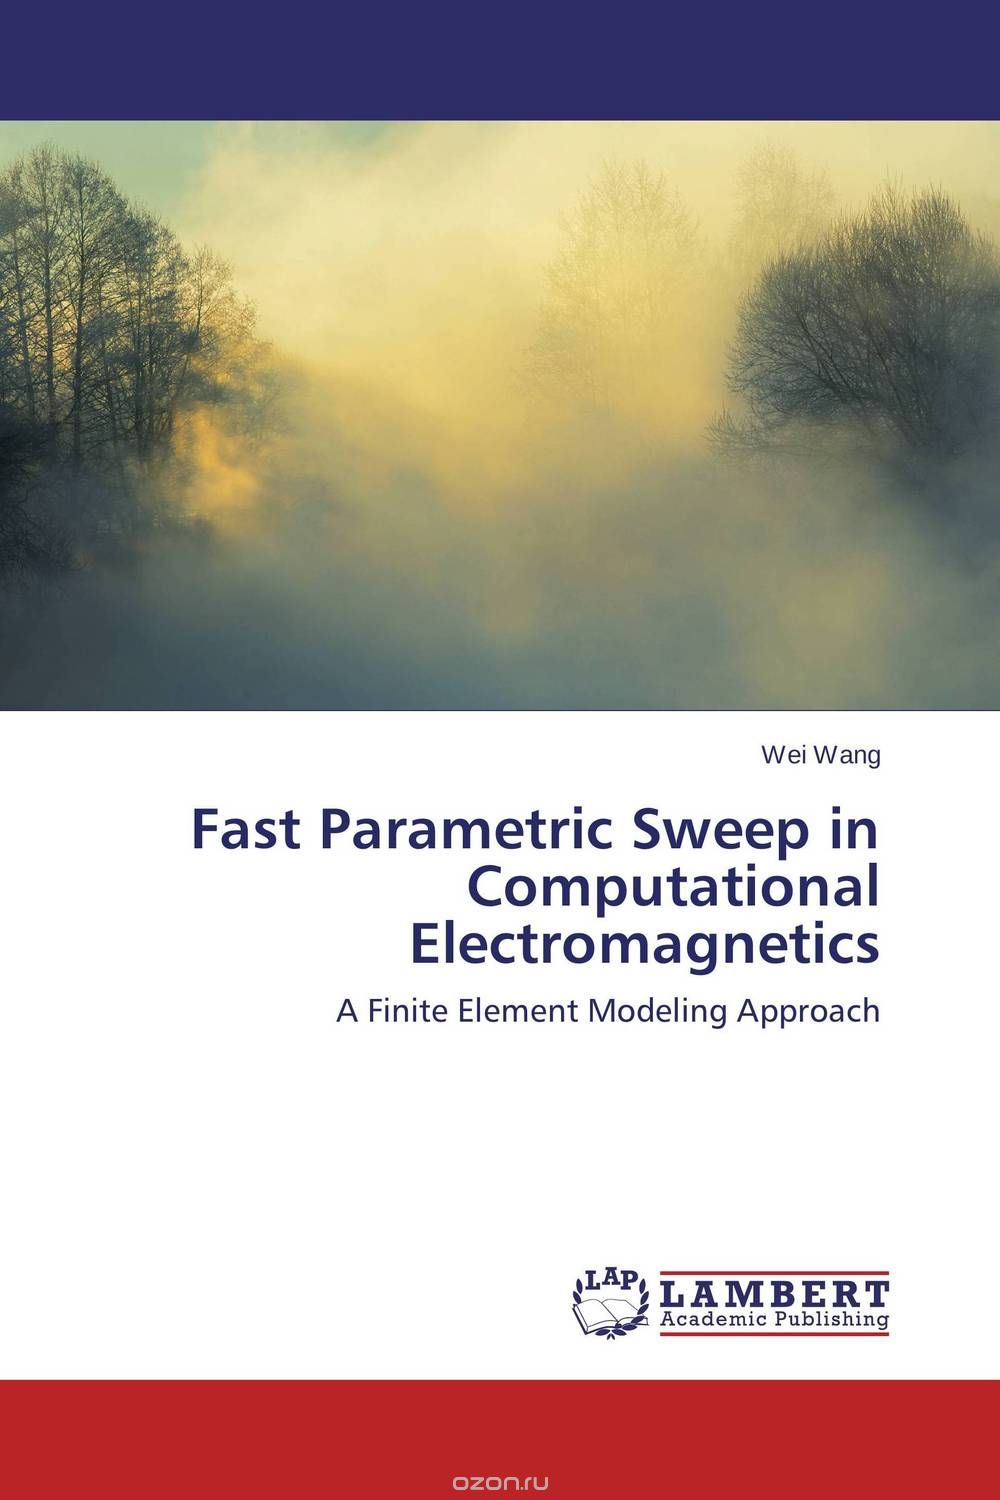 Fast Parametric Sweep in Computational Electromagnetics